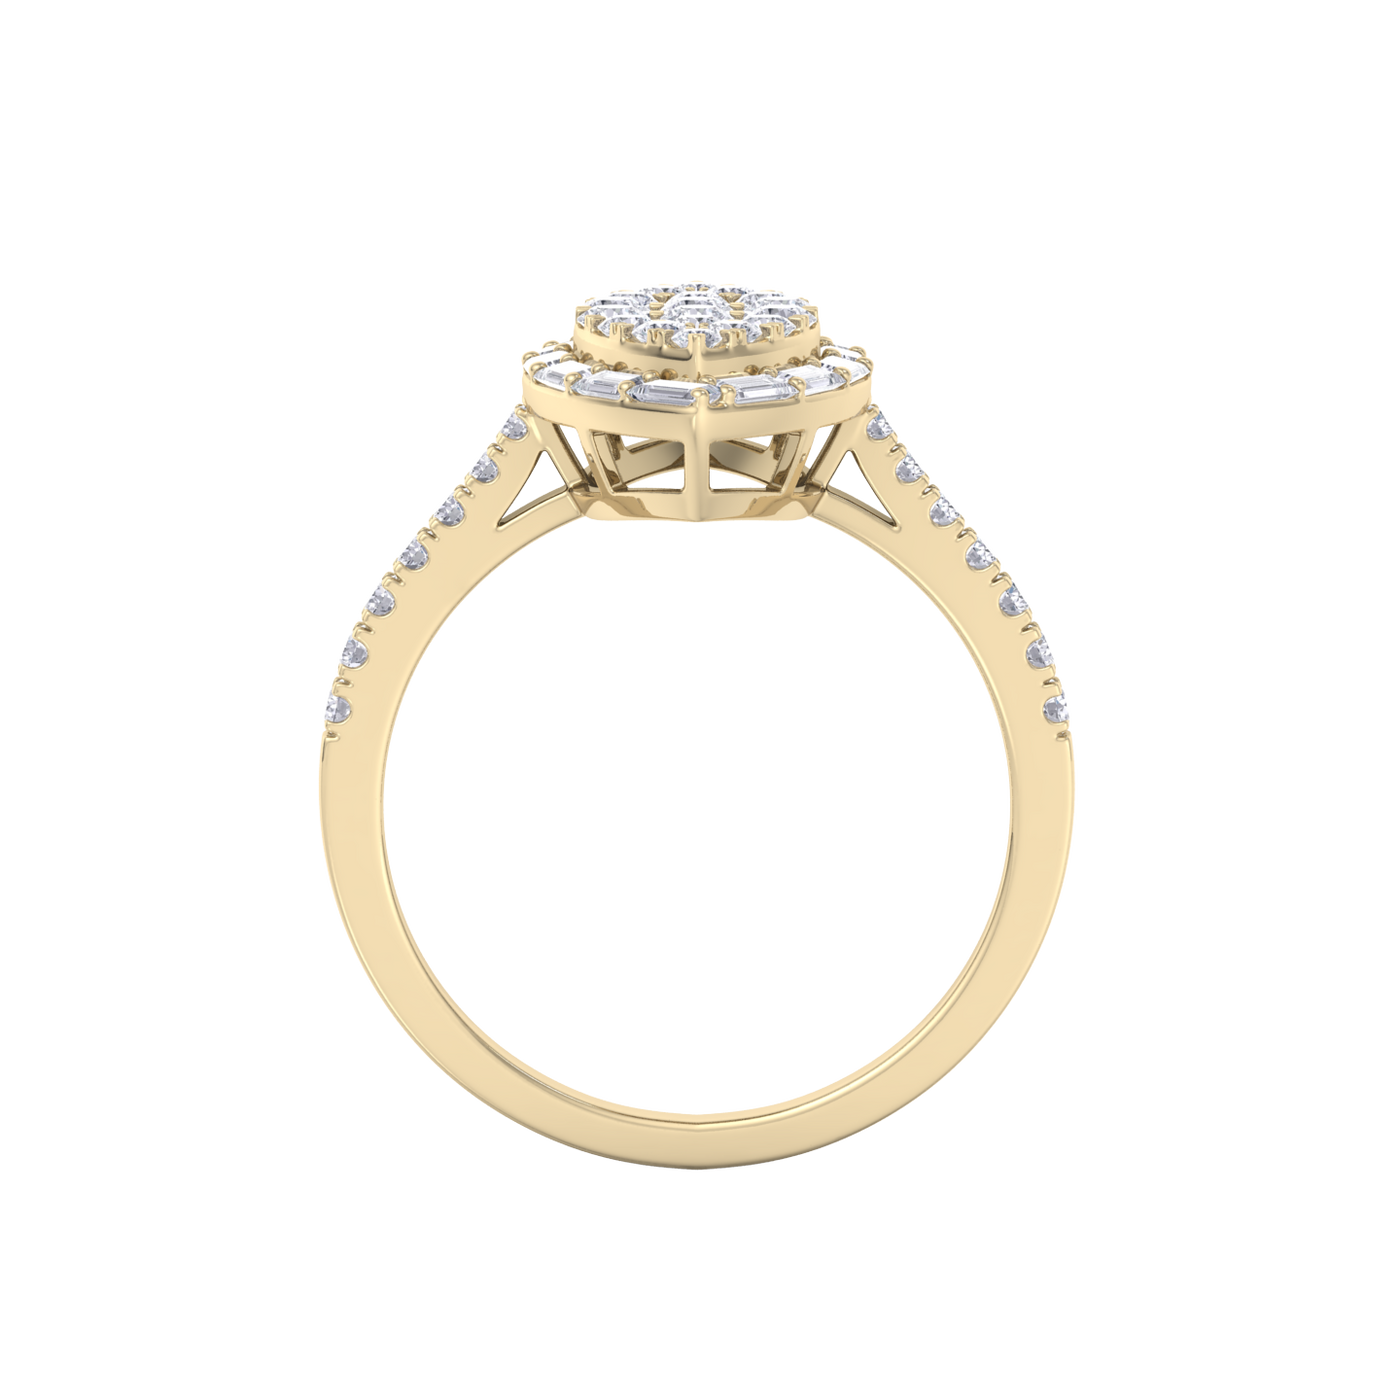 Marquise cluster ring in rose gold with white diamonds of 1.03 ct in weight